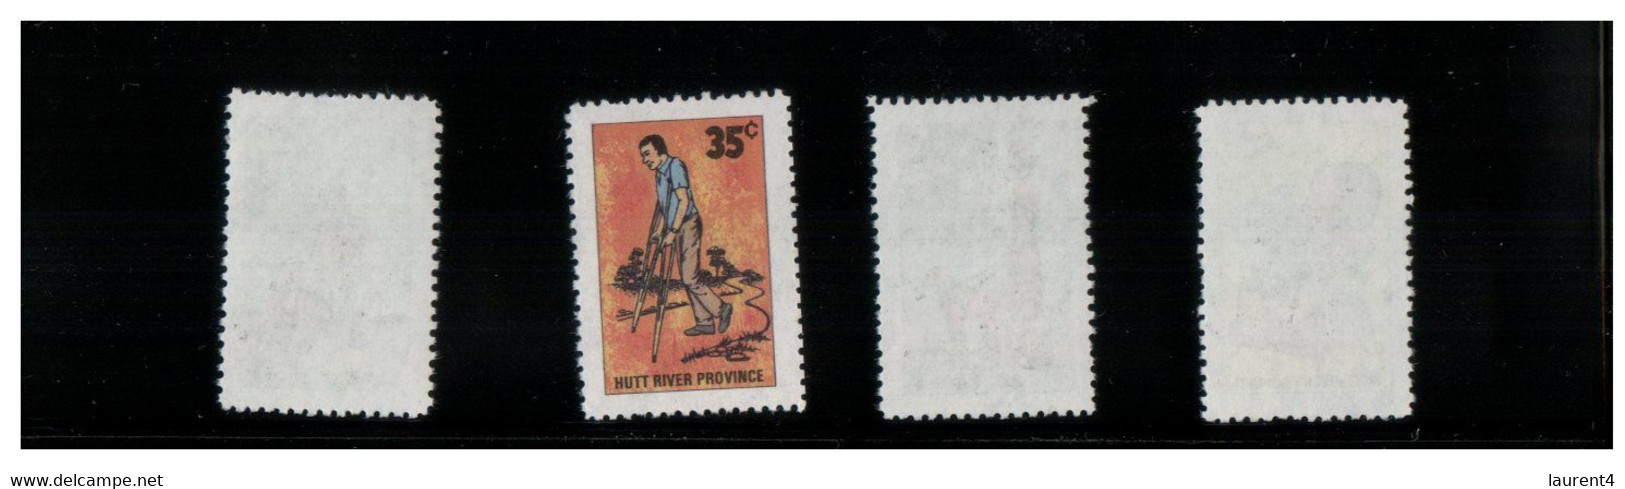 (O 17) Australia - Hutt River Province Cinderella Stamps (micro State) 1981 Disabled Year (4 Stamps) - Cinderellas